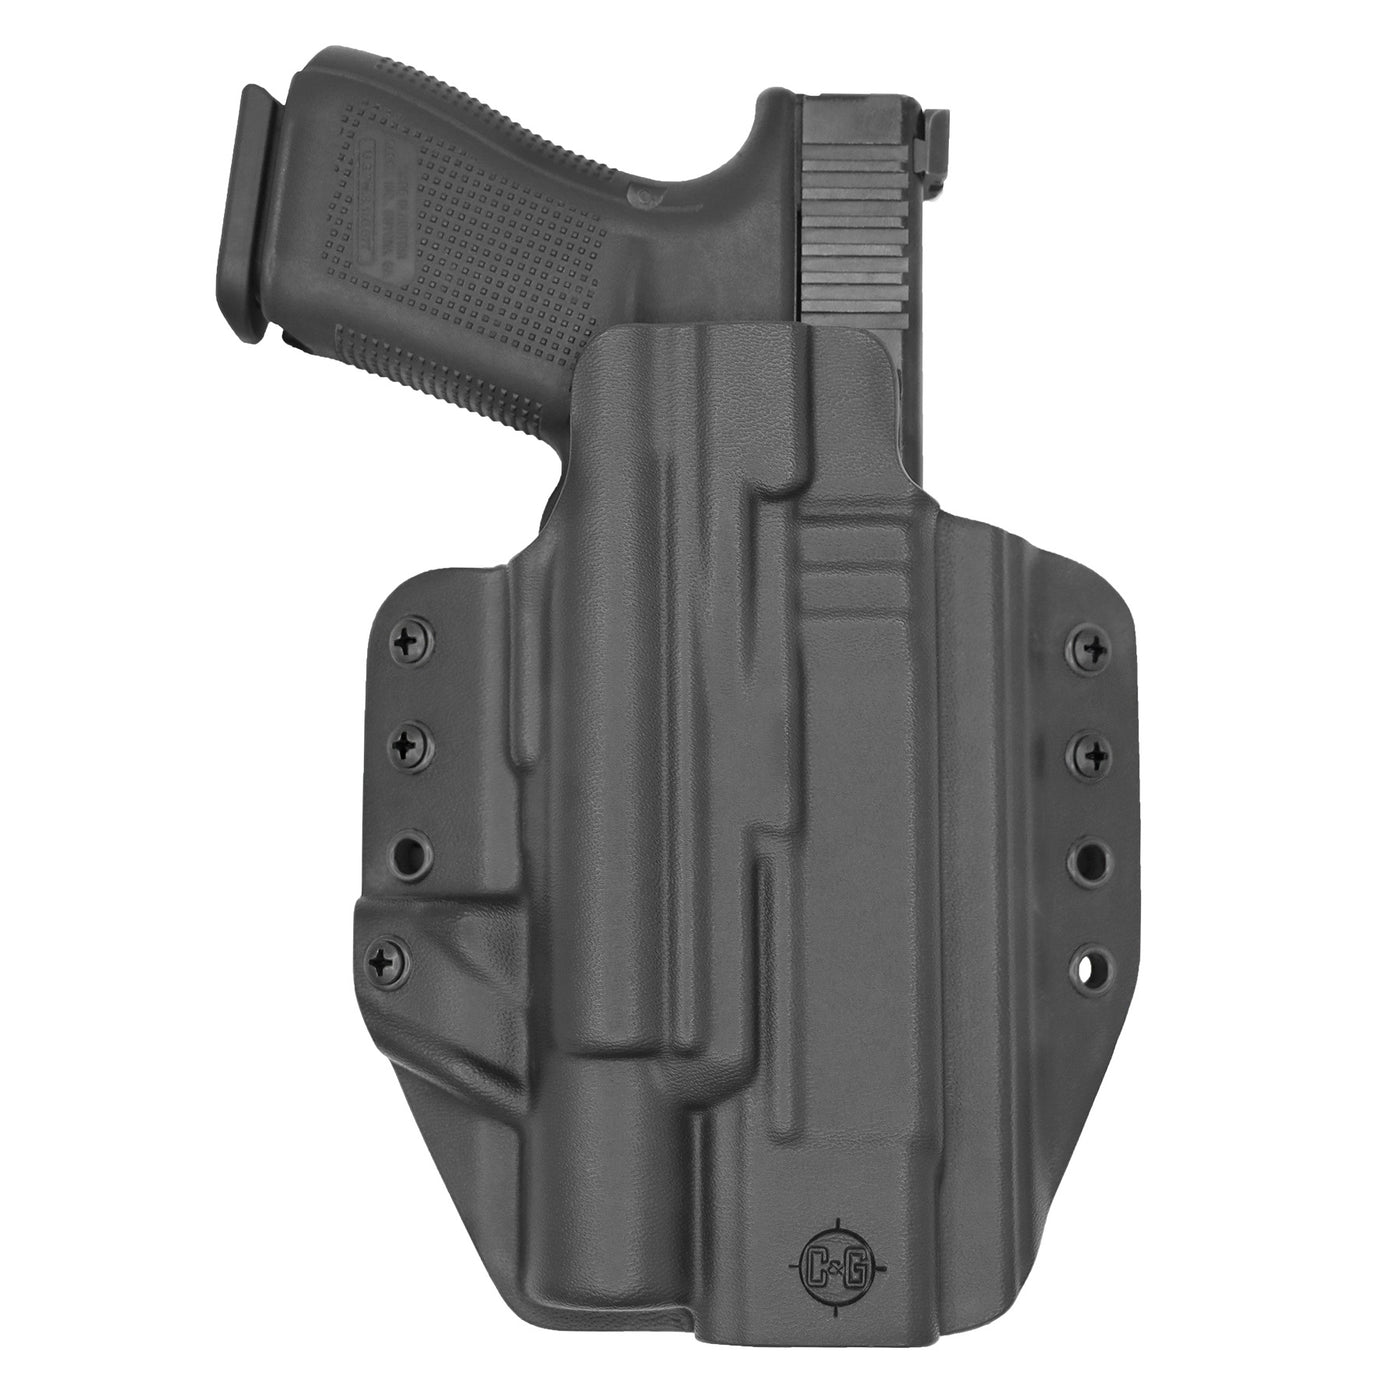 C&G Holsters quickship OWB Tactical Glock 20/21 Surefire X300 in holstered position